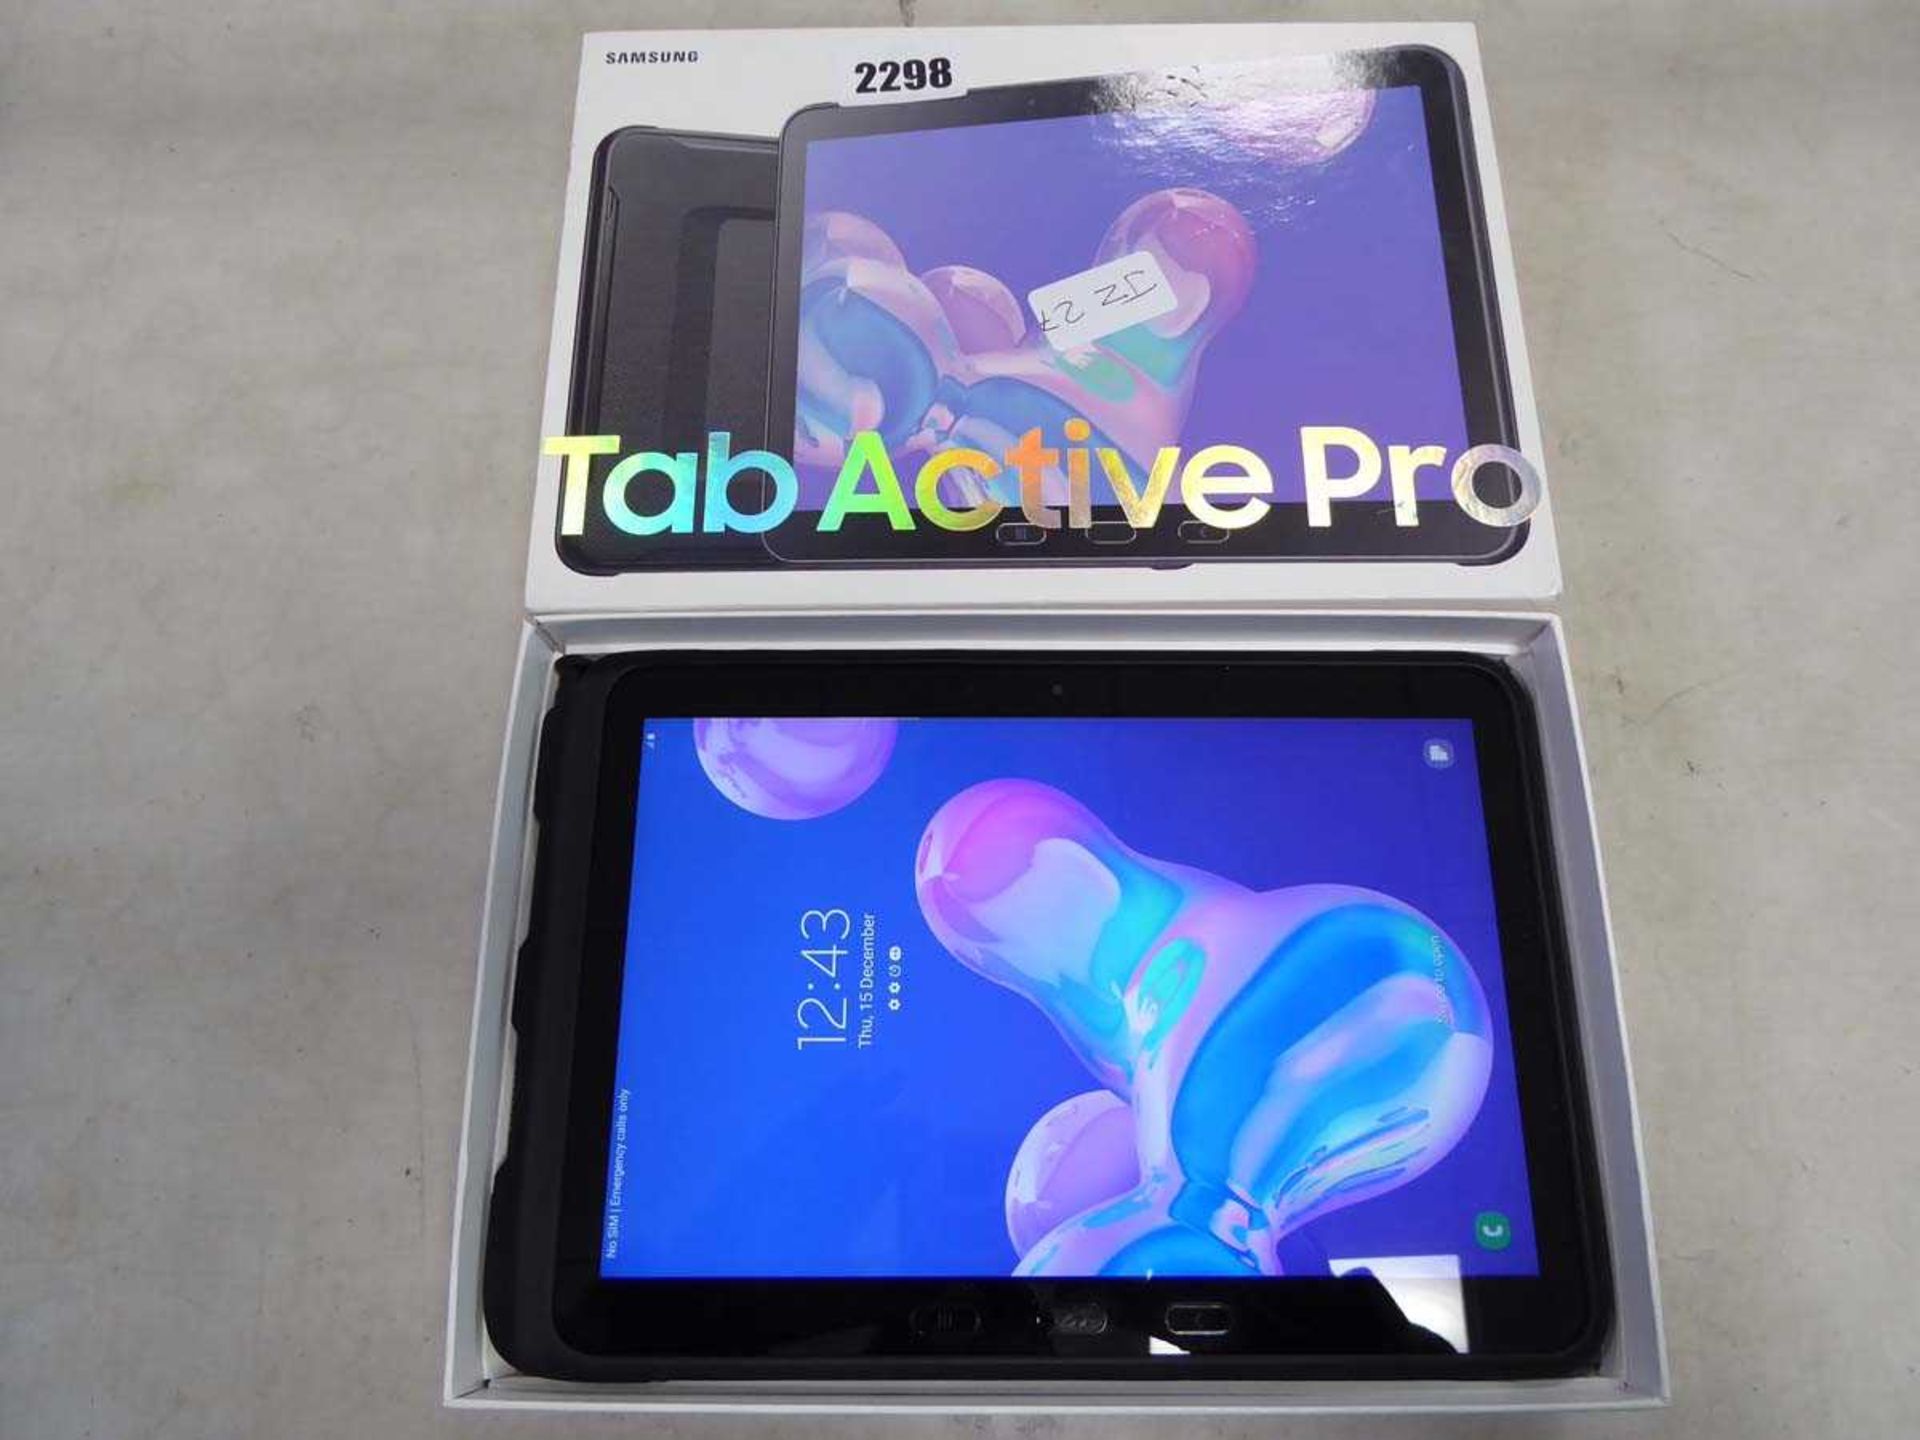 Samsung Tab active pro tablet in box